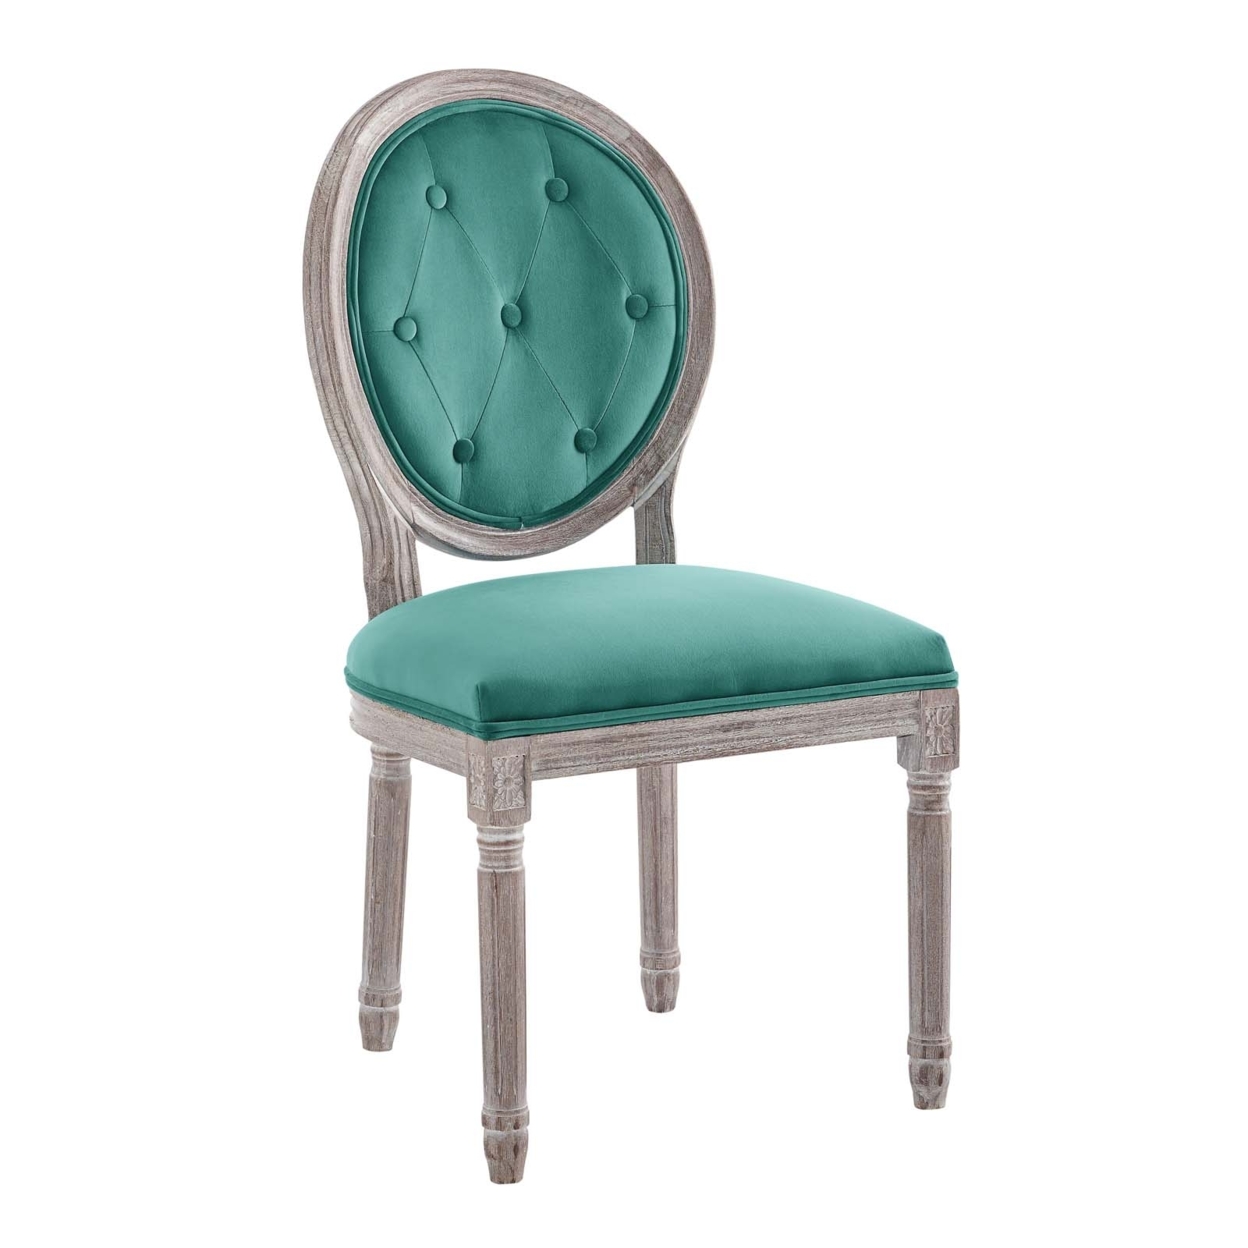 Arise Vintage French Performance Velvet Dining Side Chair, Natural Teal